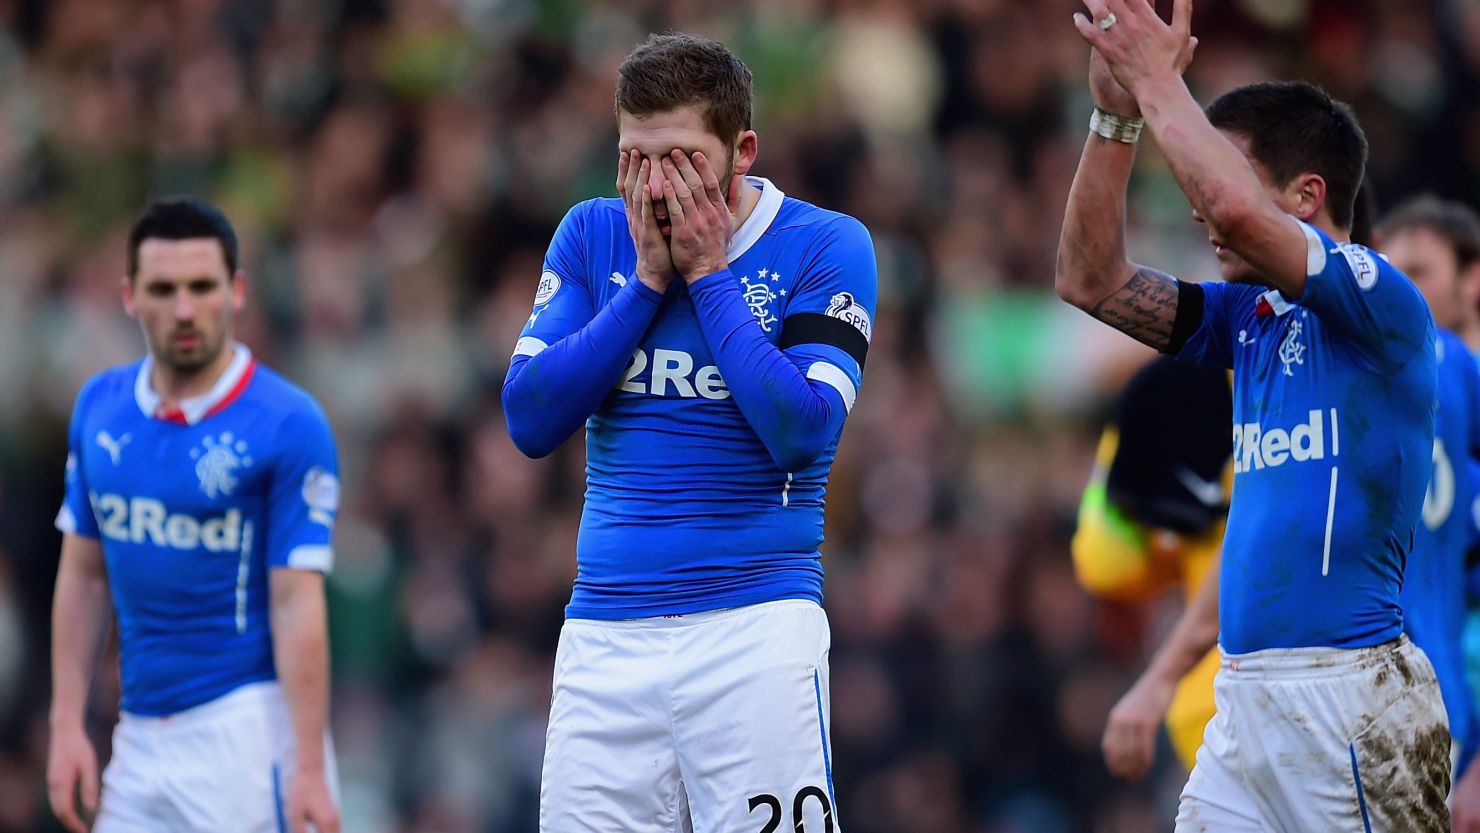 Dejected Rangers players troop off Hampden after losing 2-0 to Celtic in the Scottish League Cup semifinal. 